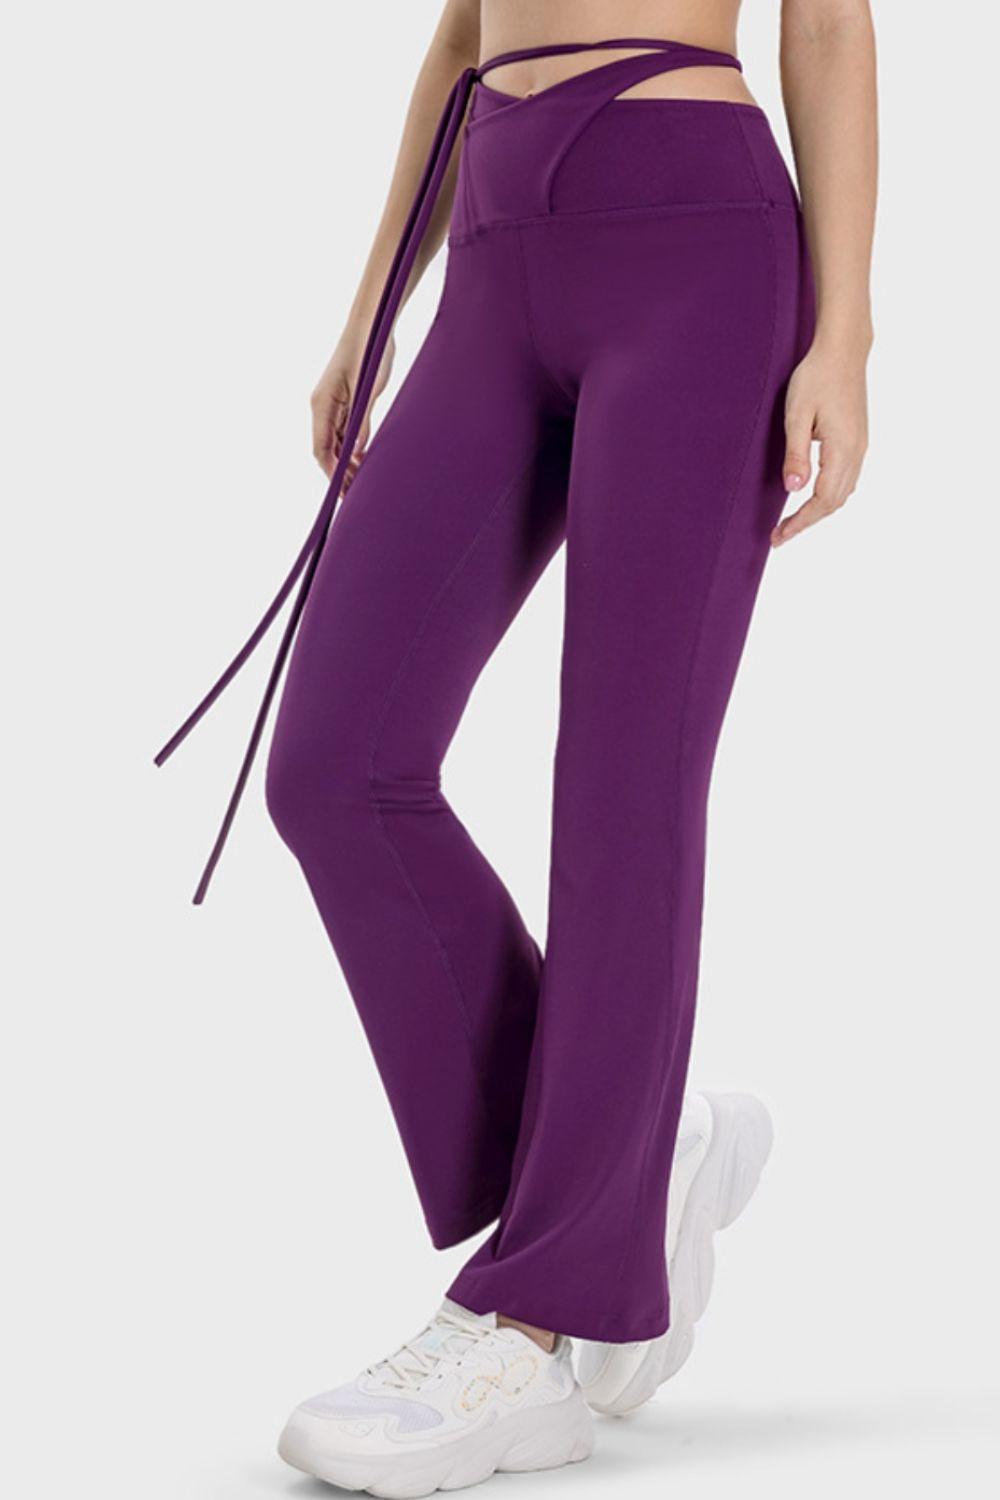 a woman wearing purple pants and a bra top